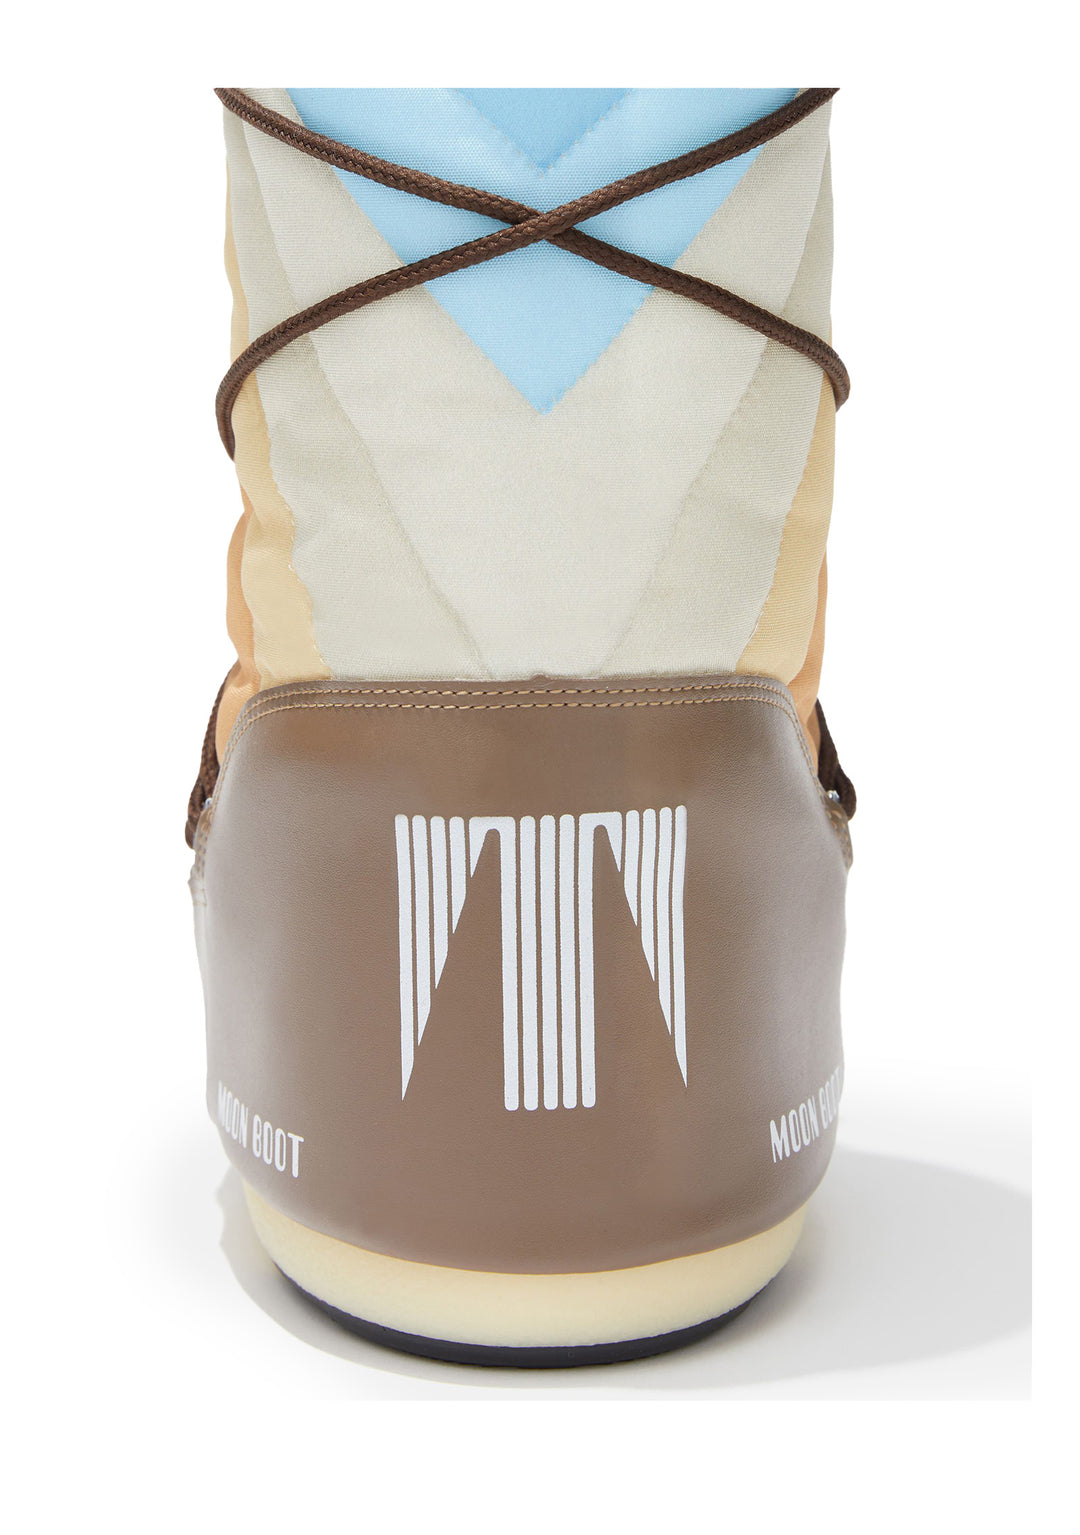 STIVALE UNISEX Brown/blue Moon Boot